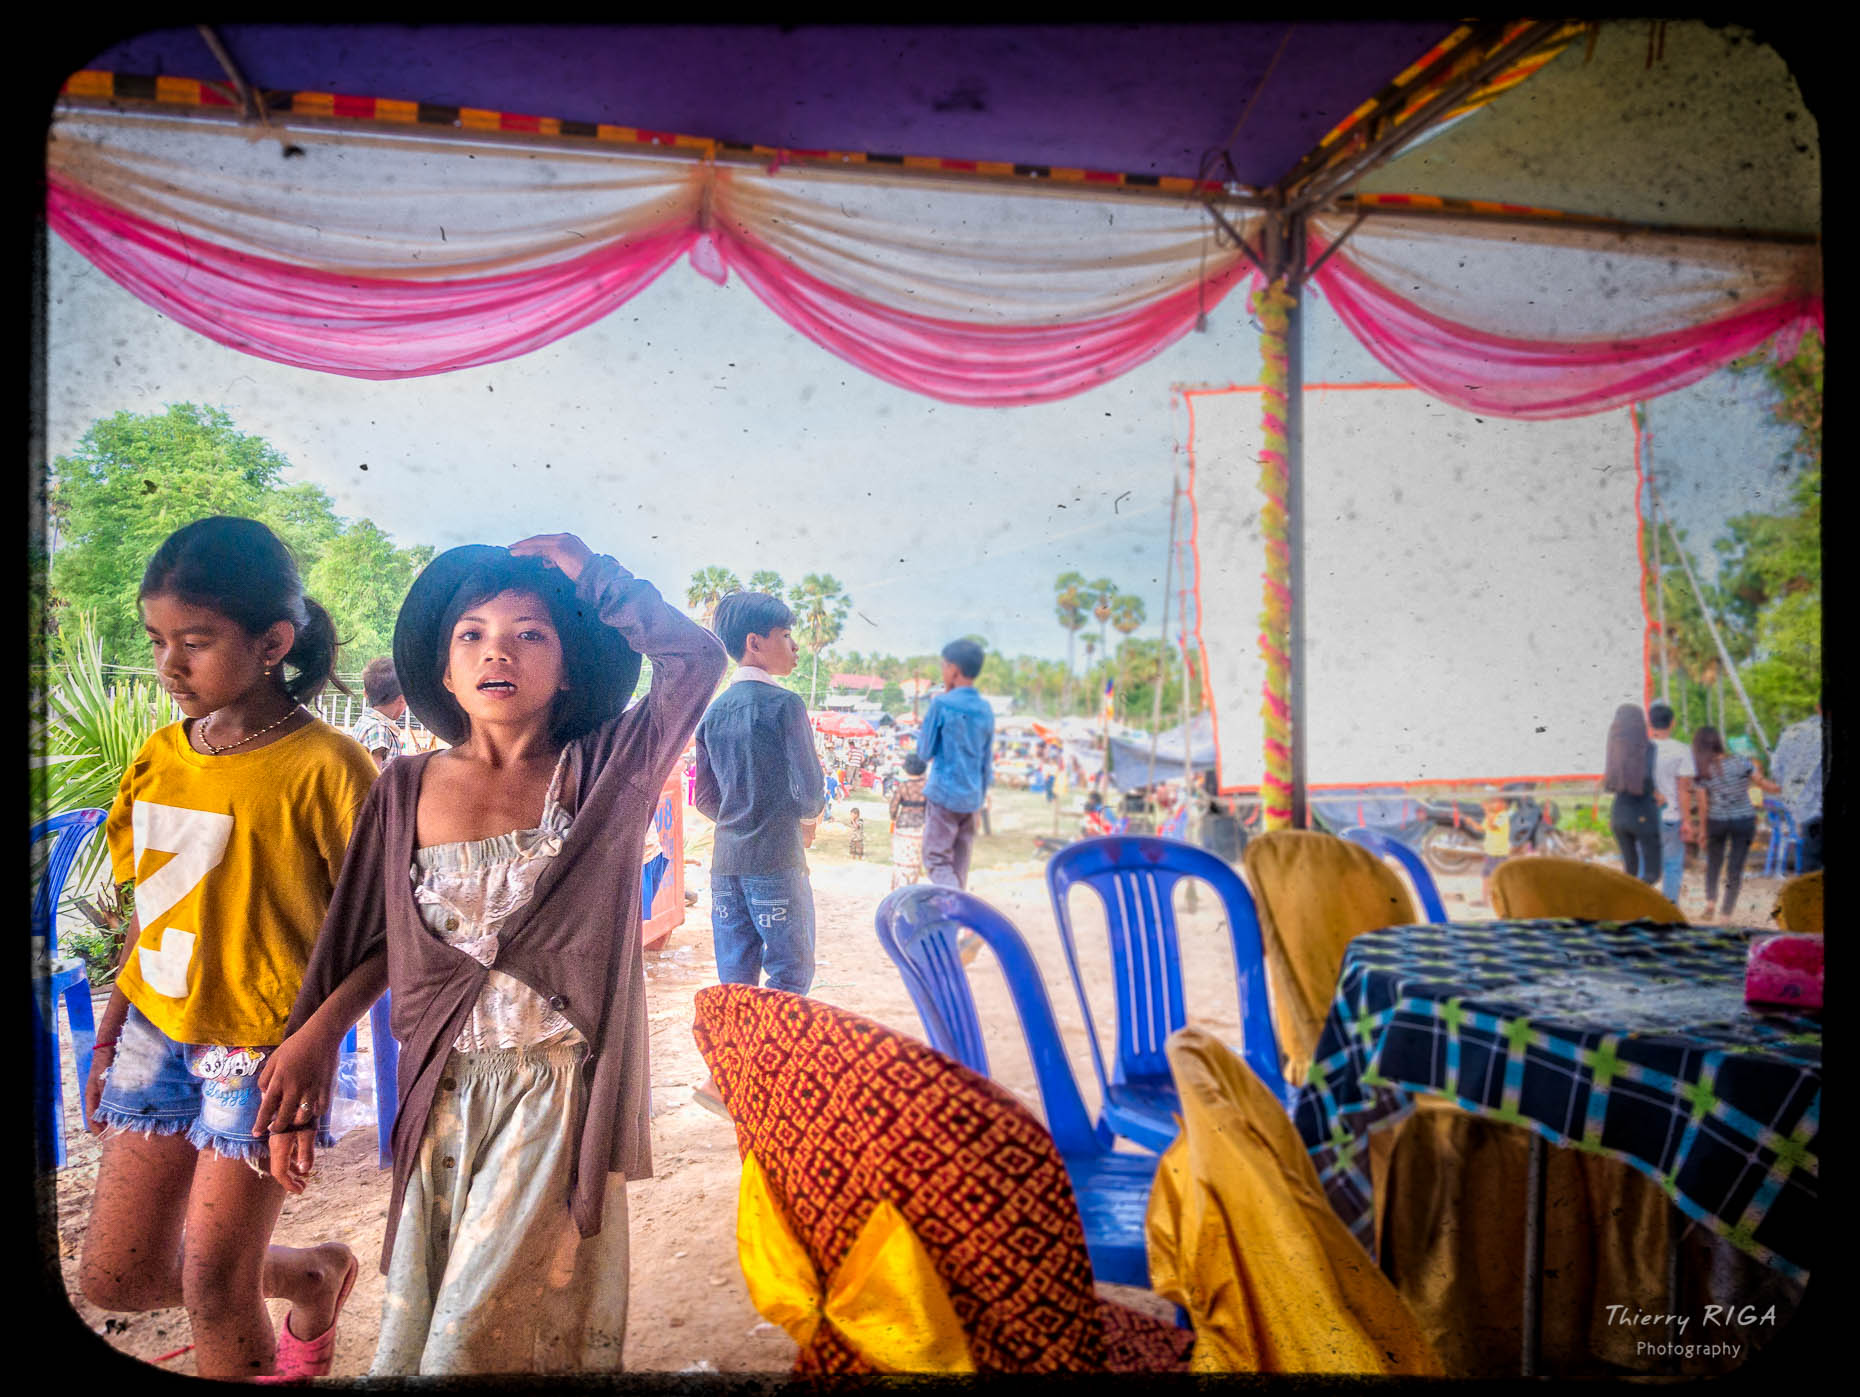 teenagers in rural festival in Cambodia, Thierry Riga, Angkor Photography